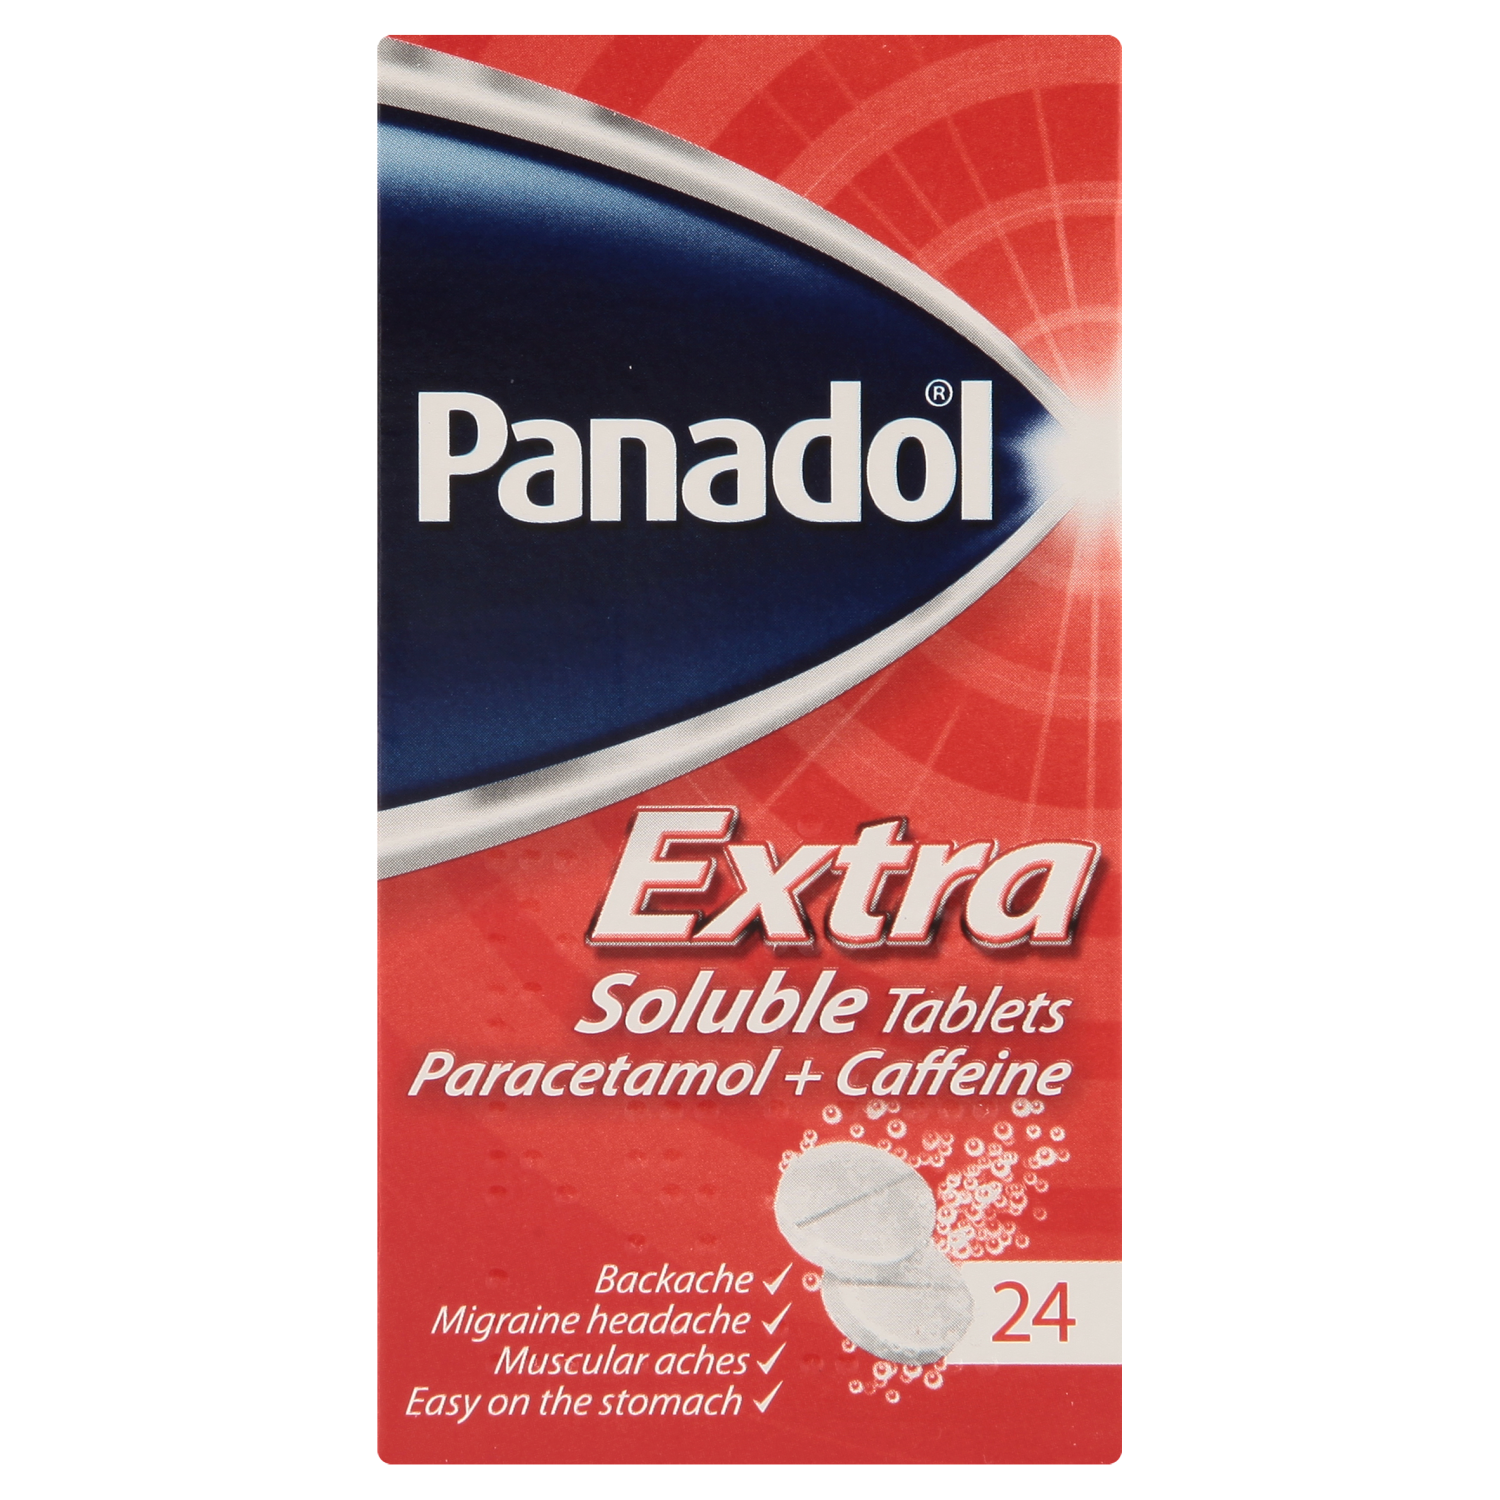 Panadol Extra Soluble (24 Tablets)